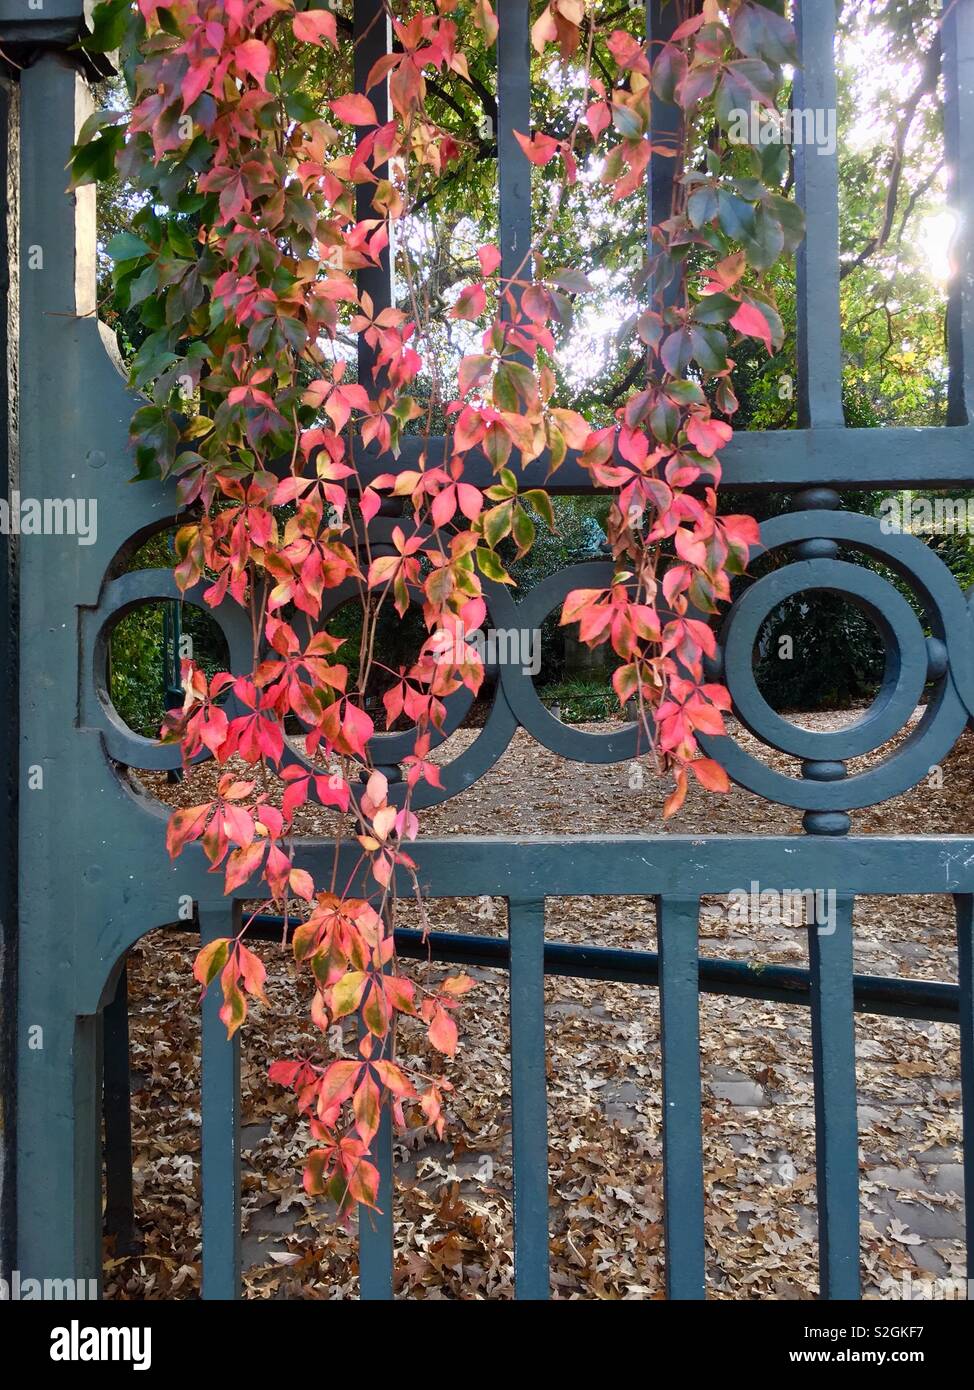 Entrance to the Jardin des Plantes in Jussieu, Paris with trailing Virginia creeper. Autumn colours Stock Photo